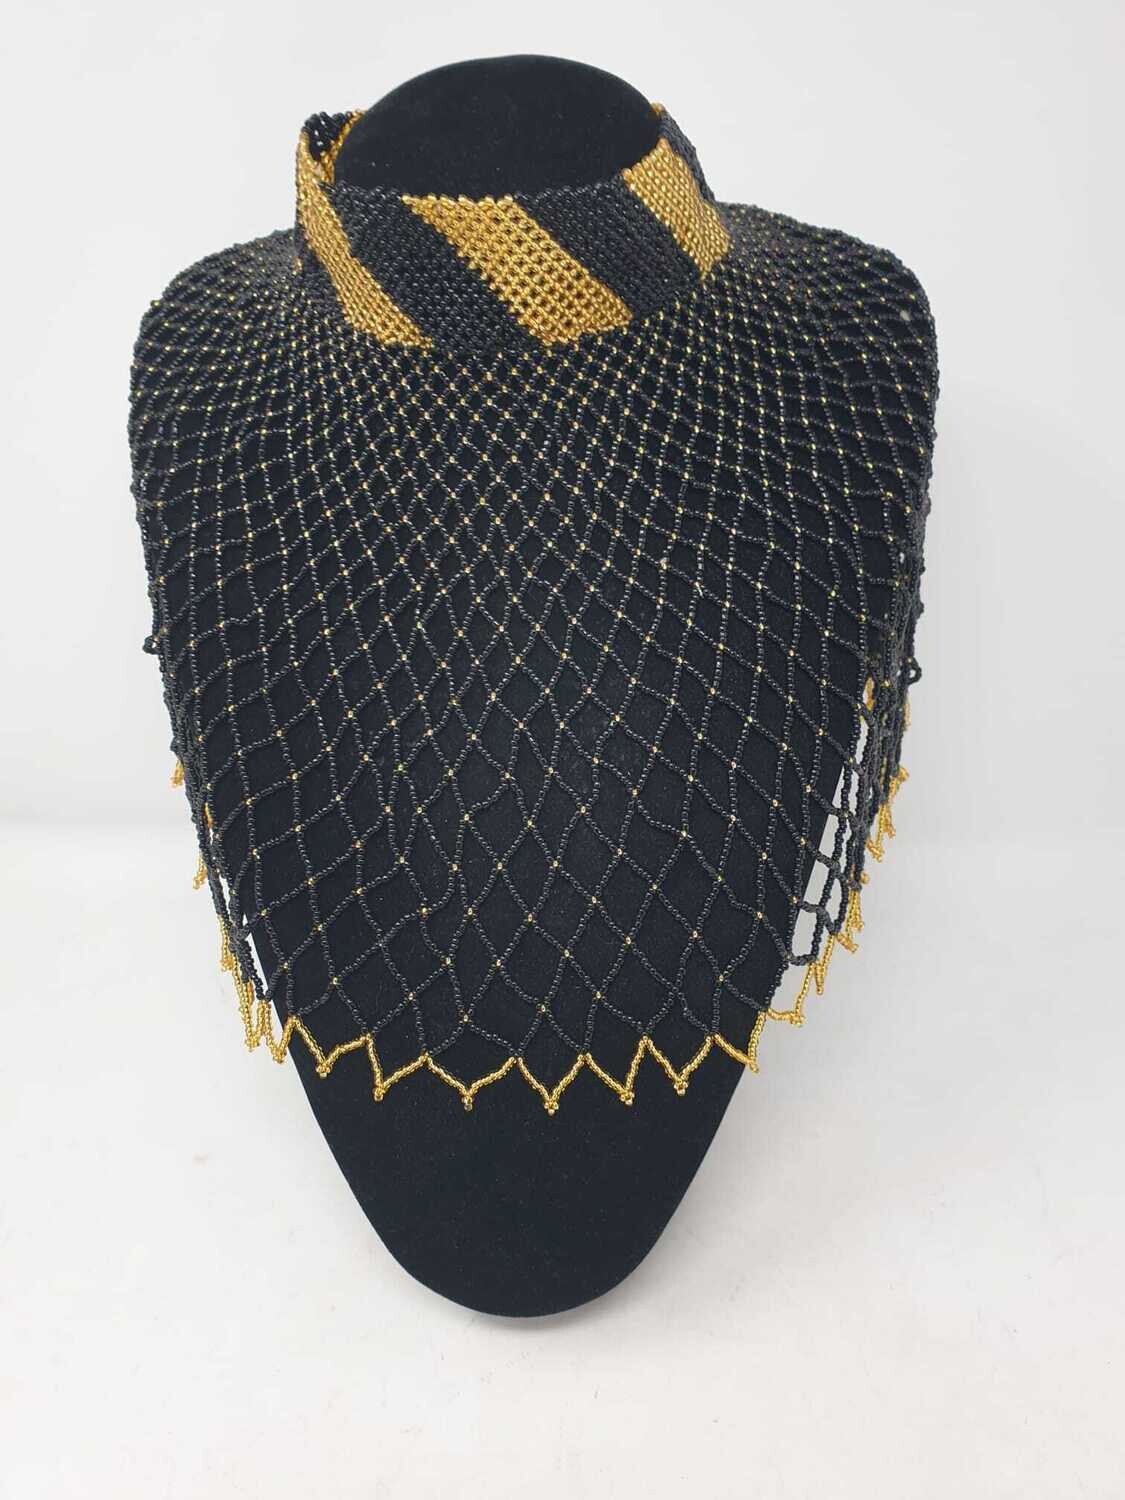 Statement Handbeaded Necklace - Black and Gold